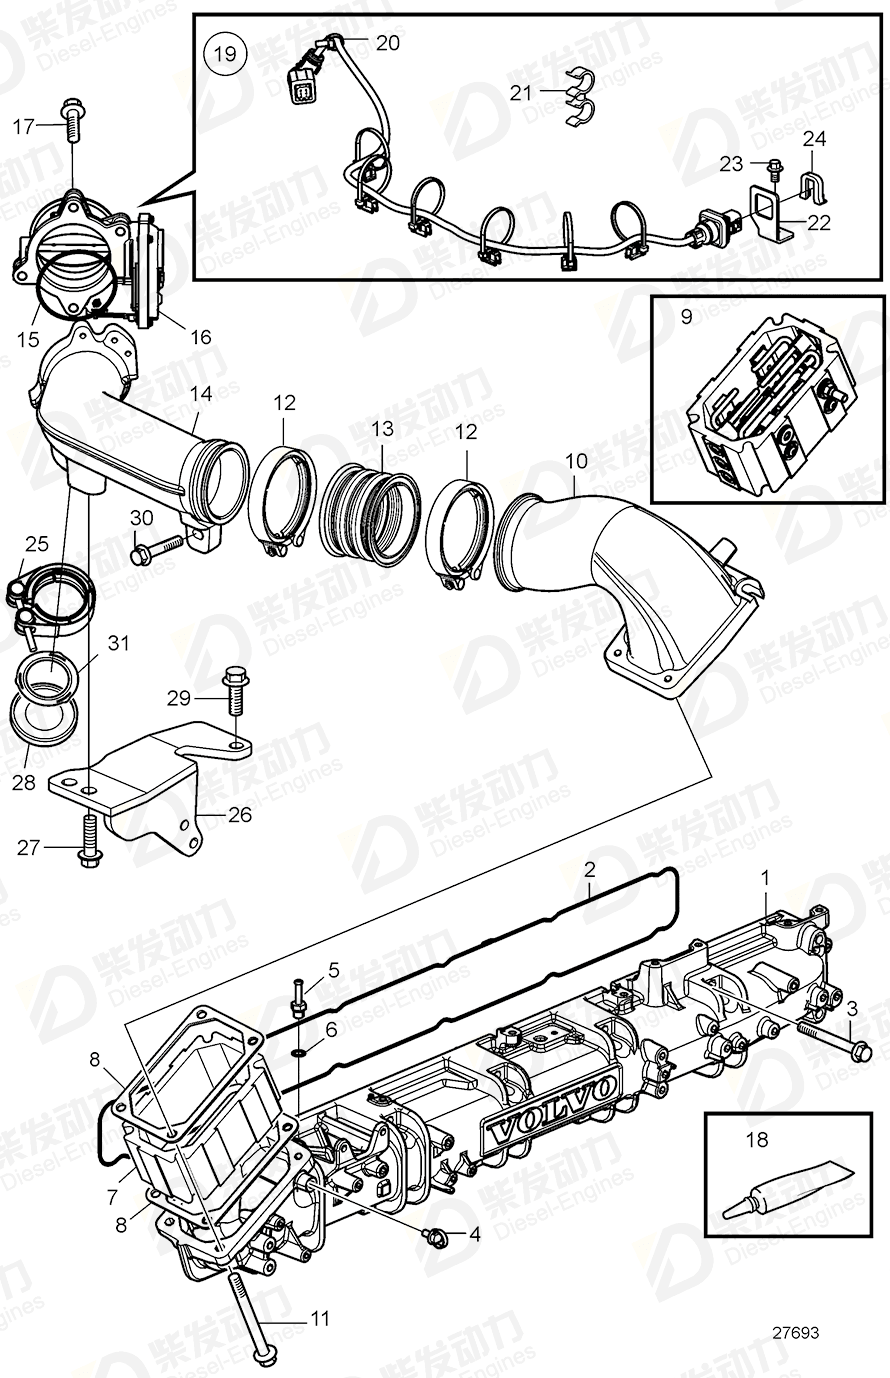 VOLVO Cable harness 22179192 Drawing